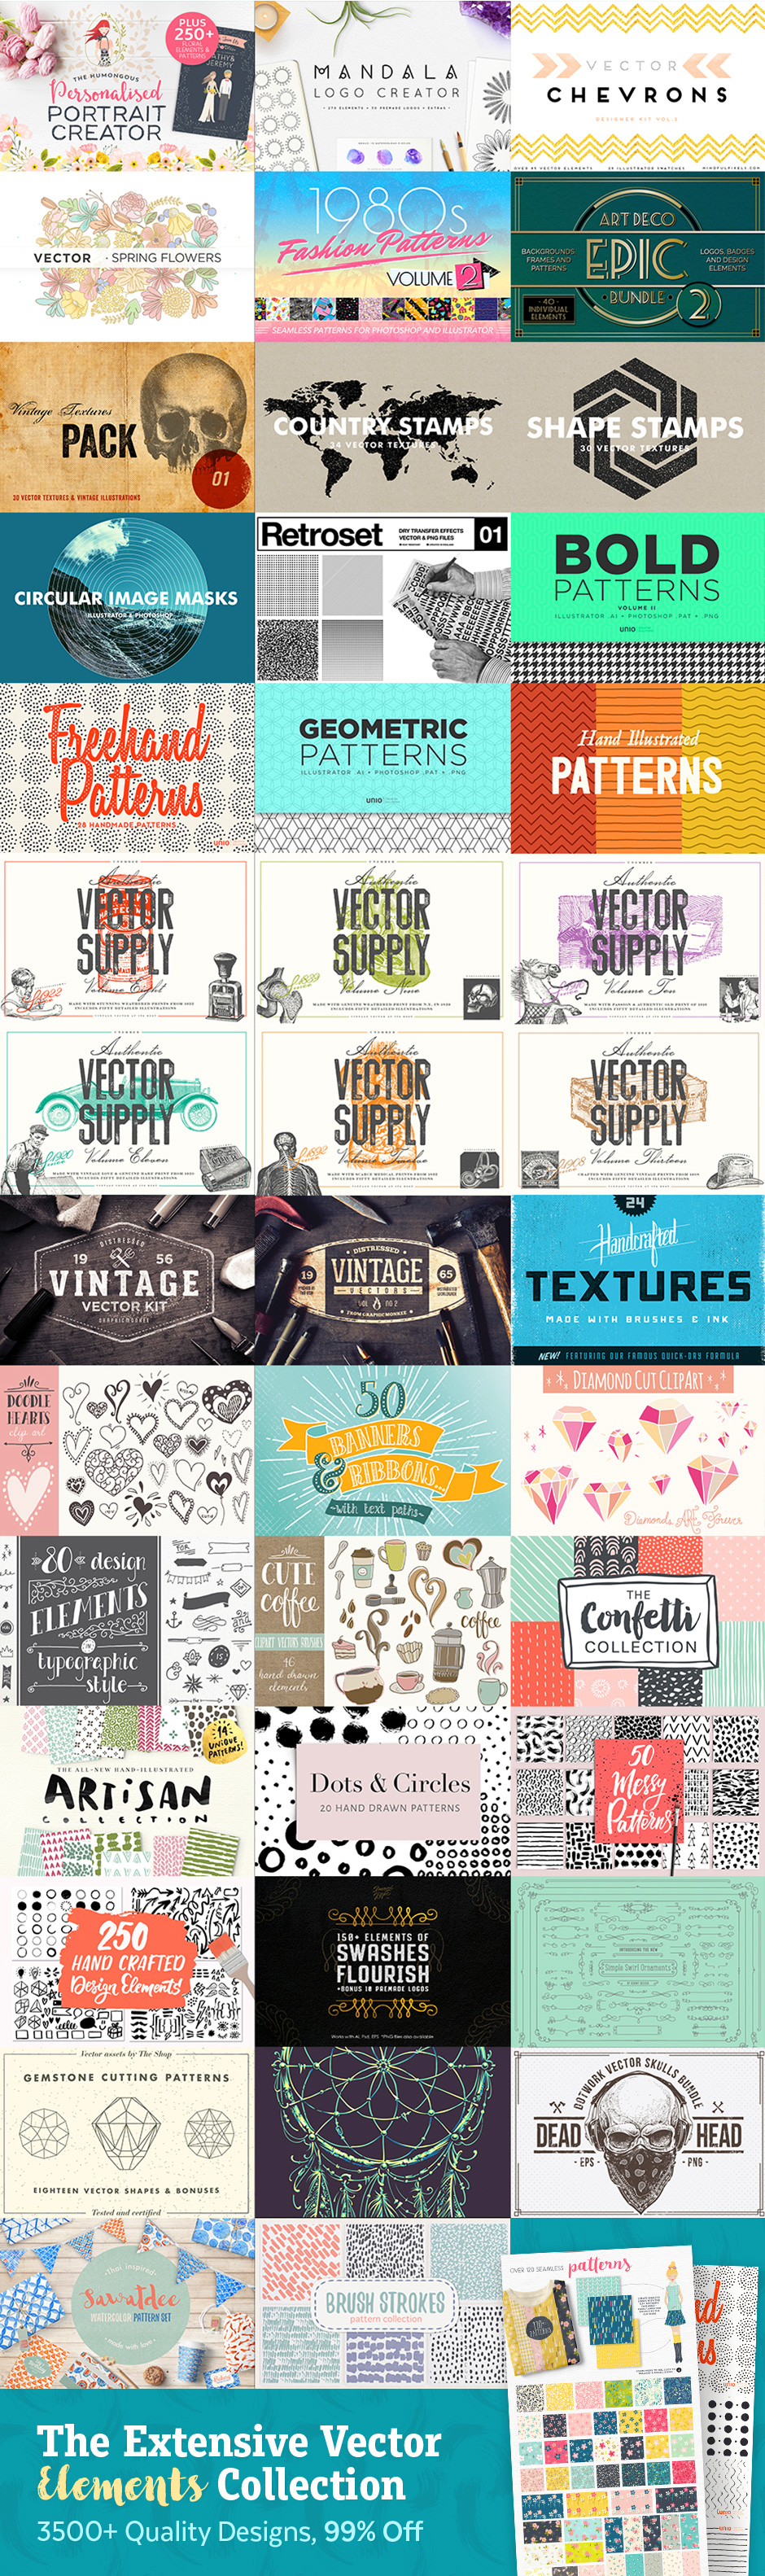 Have you been struggling to get your graphic design business off the ground? Increase your efficiency and feed that font-addiction at the same time by tapping into DesignCuts— the ultimate source for fonts and graphics. In purchasing their bundles at super discounted prices, you’ll end up with a library of resources for whatever project comes your way, and extra money in your pocket. // From MichelleHickey.Design